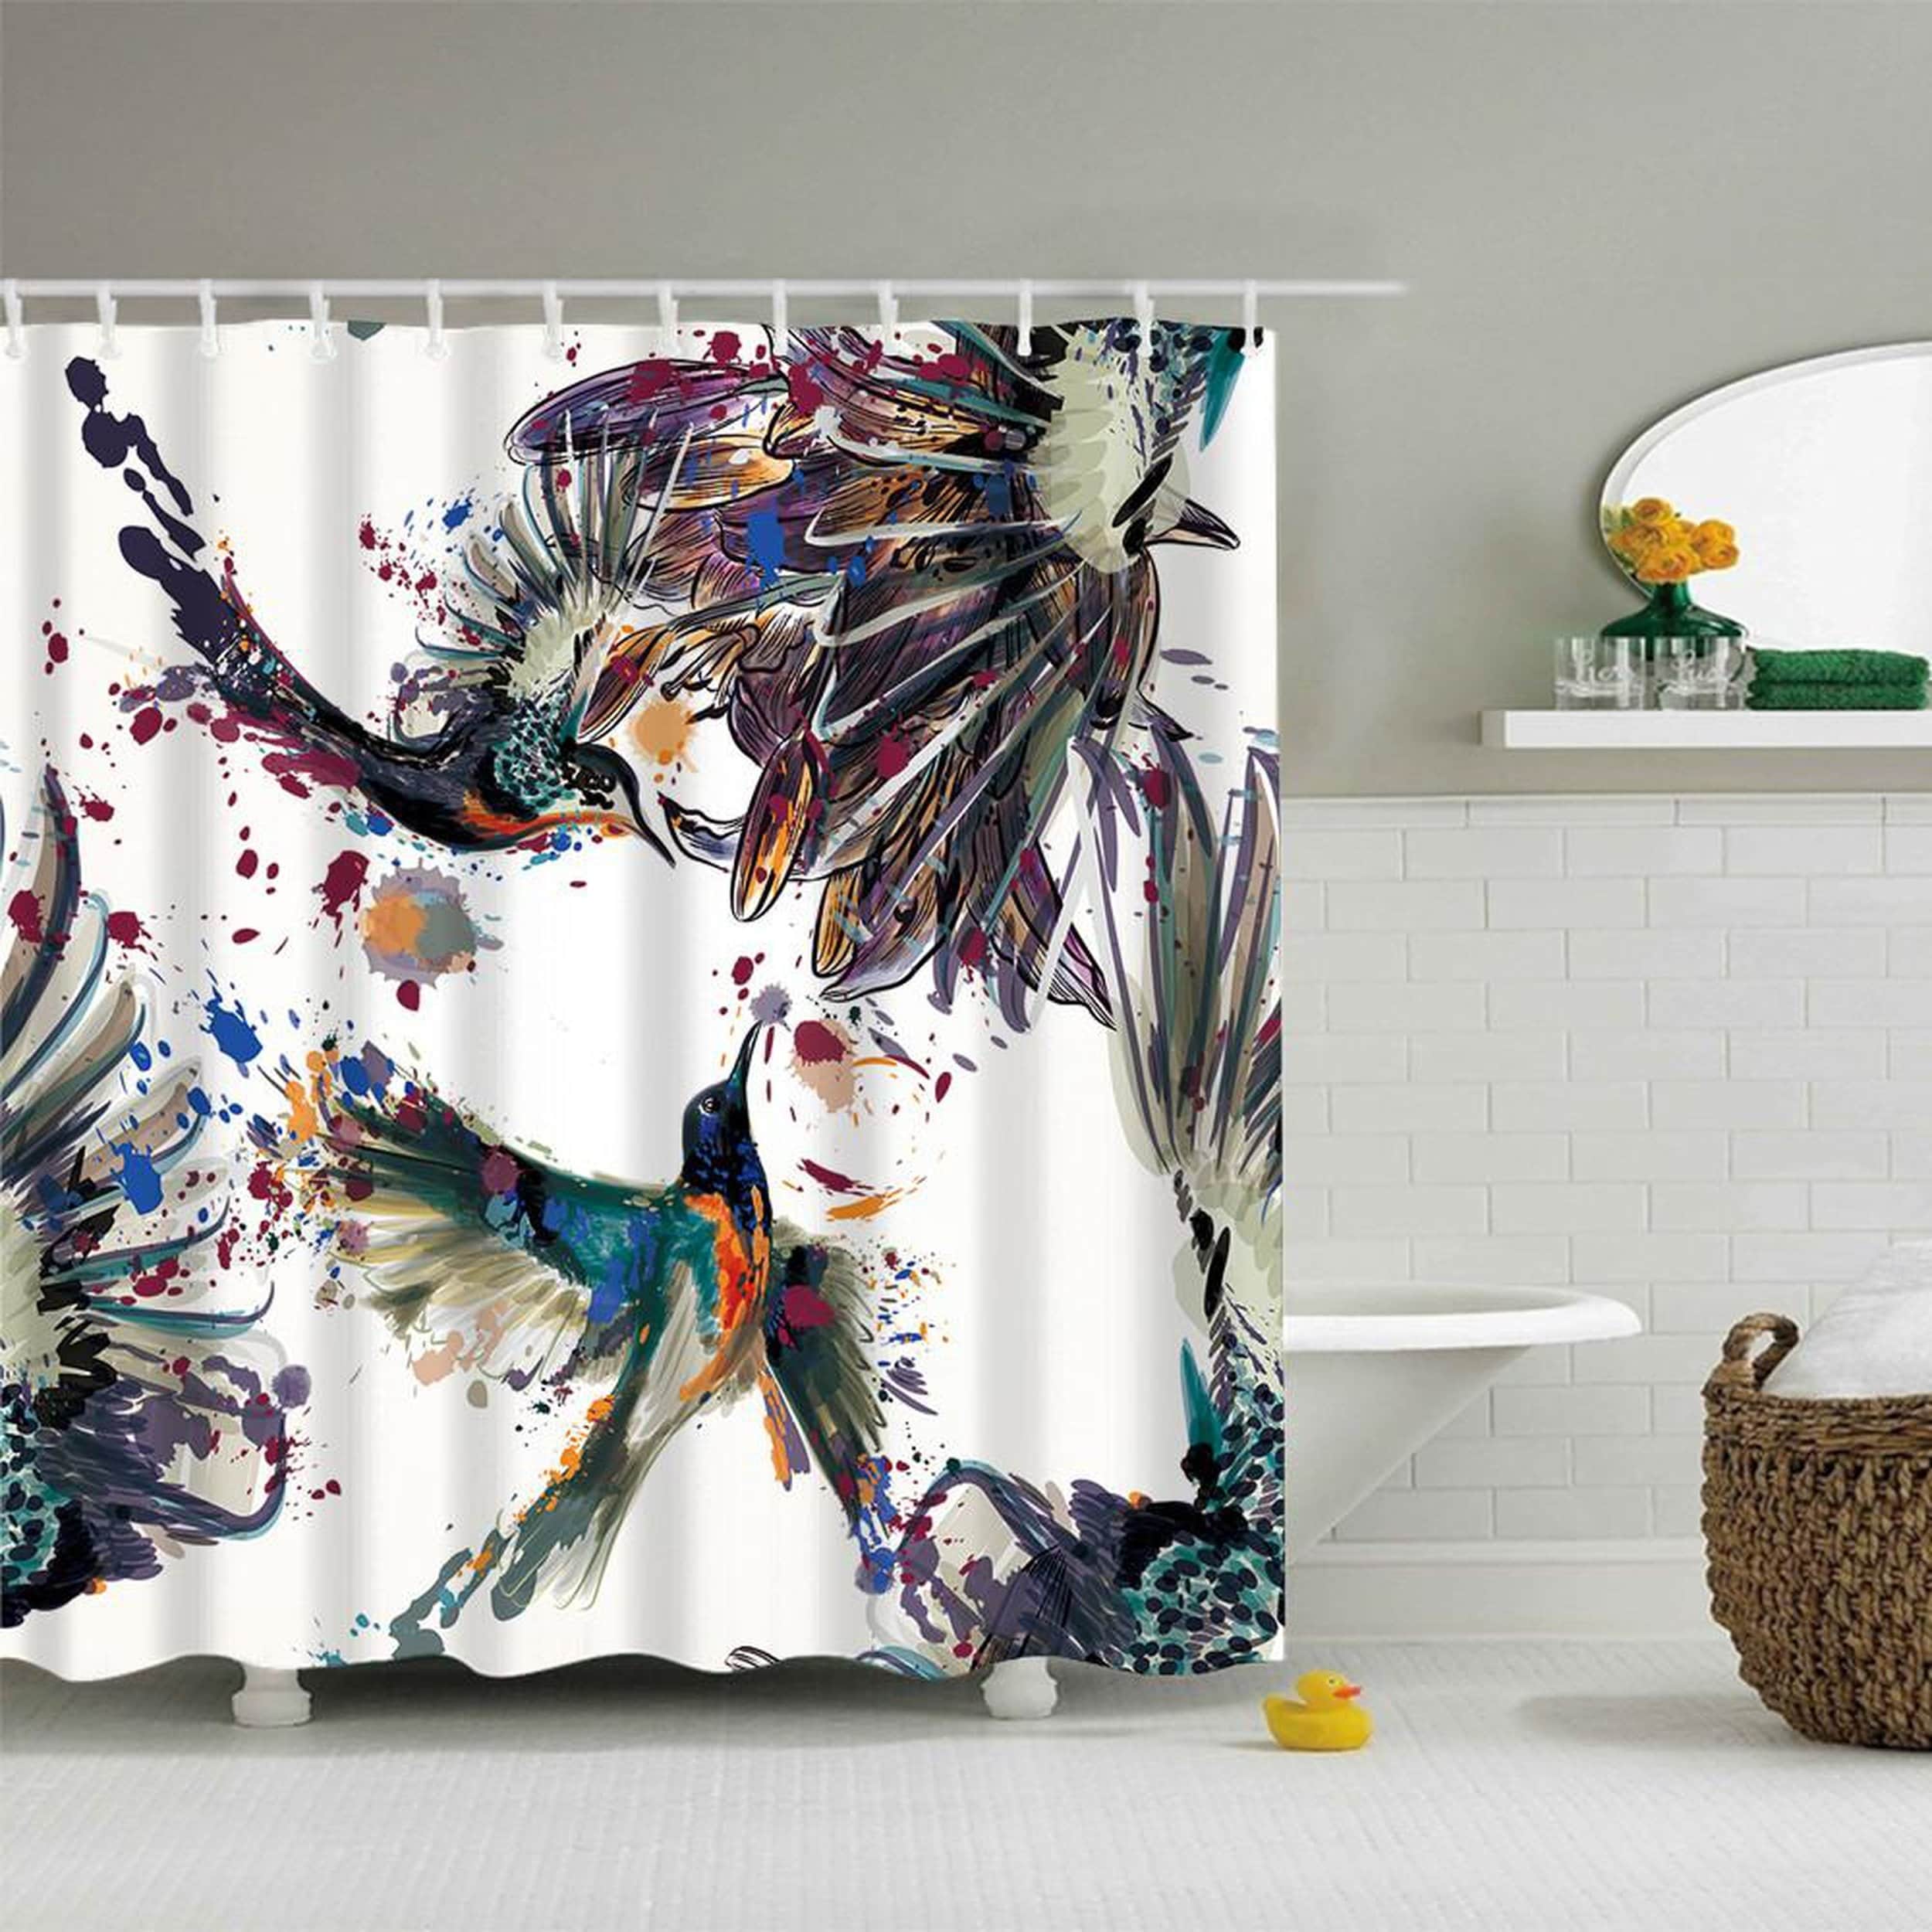 A Piece Waterproof Shower Curtain Abstract Shower Curtain Colorful Birds Shower Curtain Creative Decorative Shower Curtain